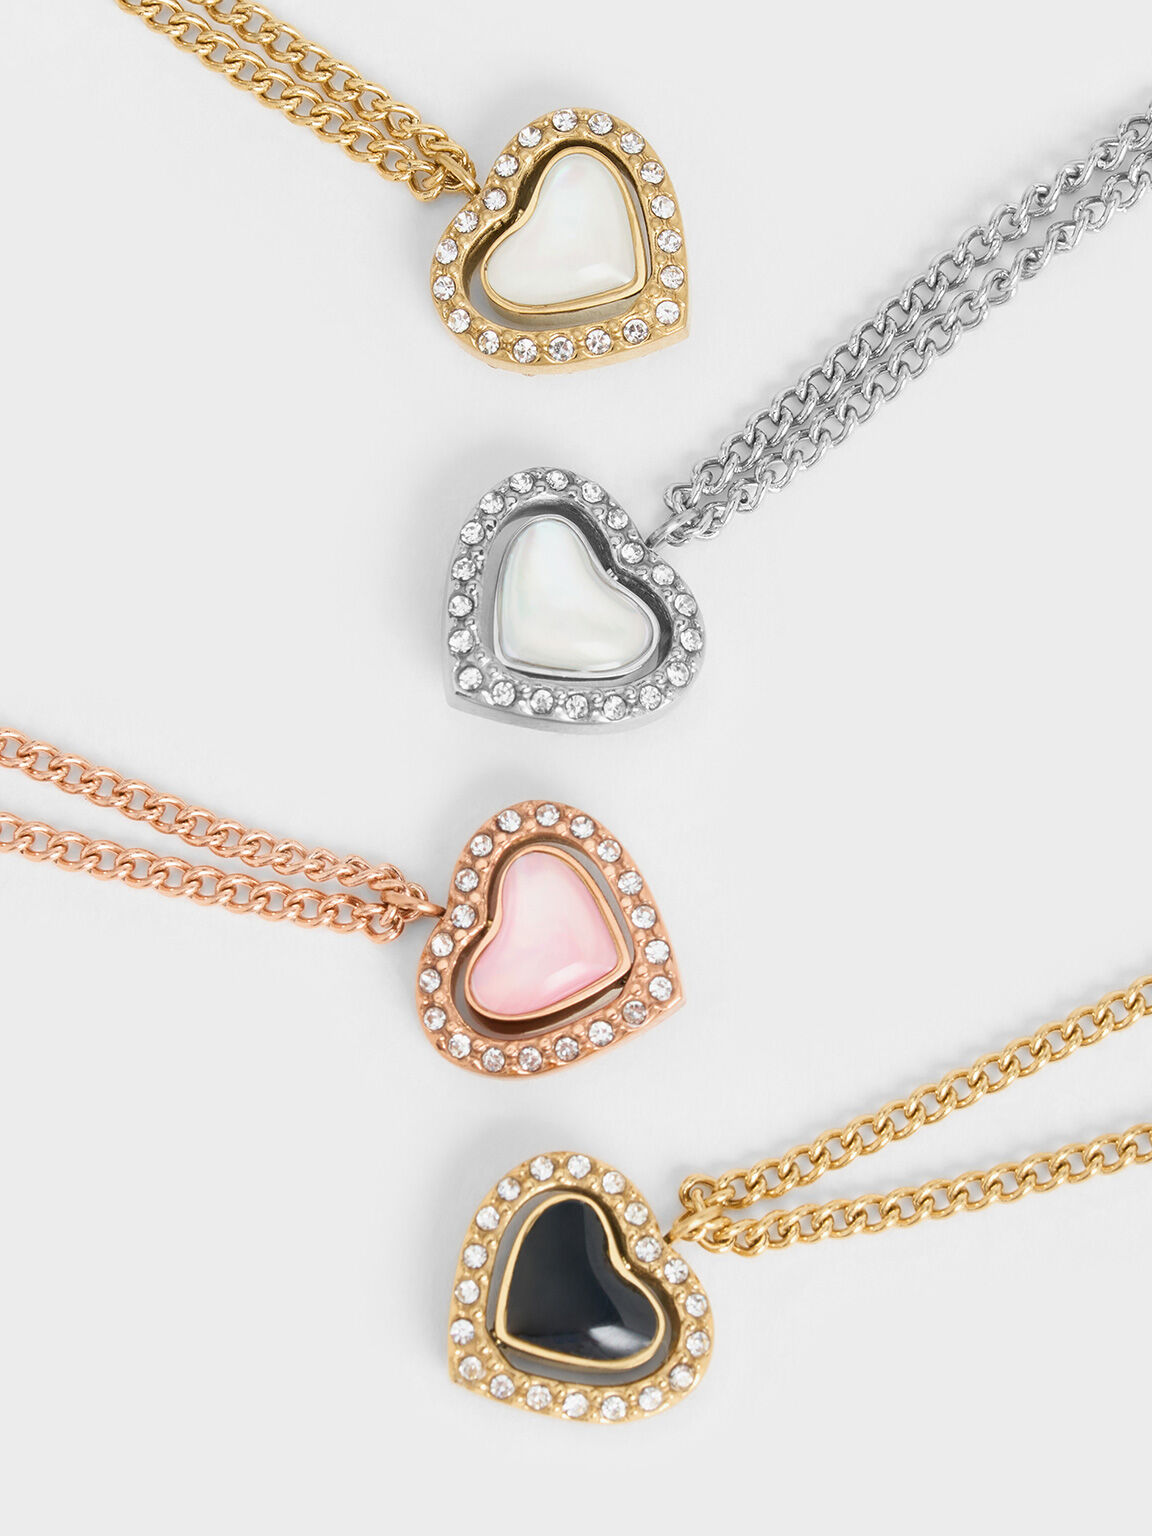 Annalise Crystal Heart-Stone Necklace, Rose Gold, hi-res